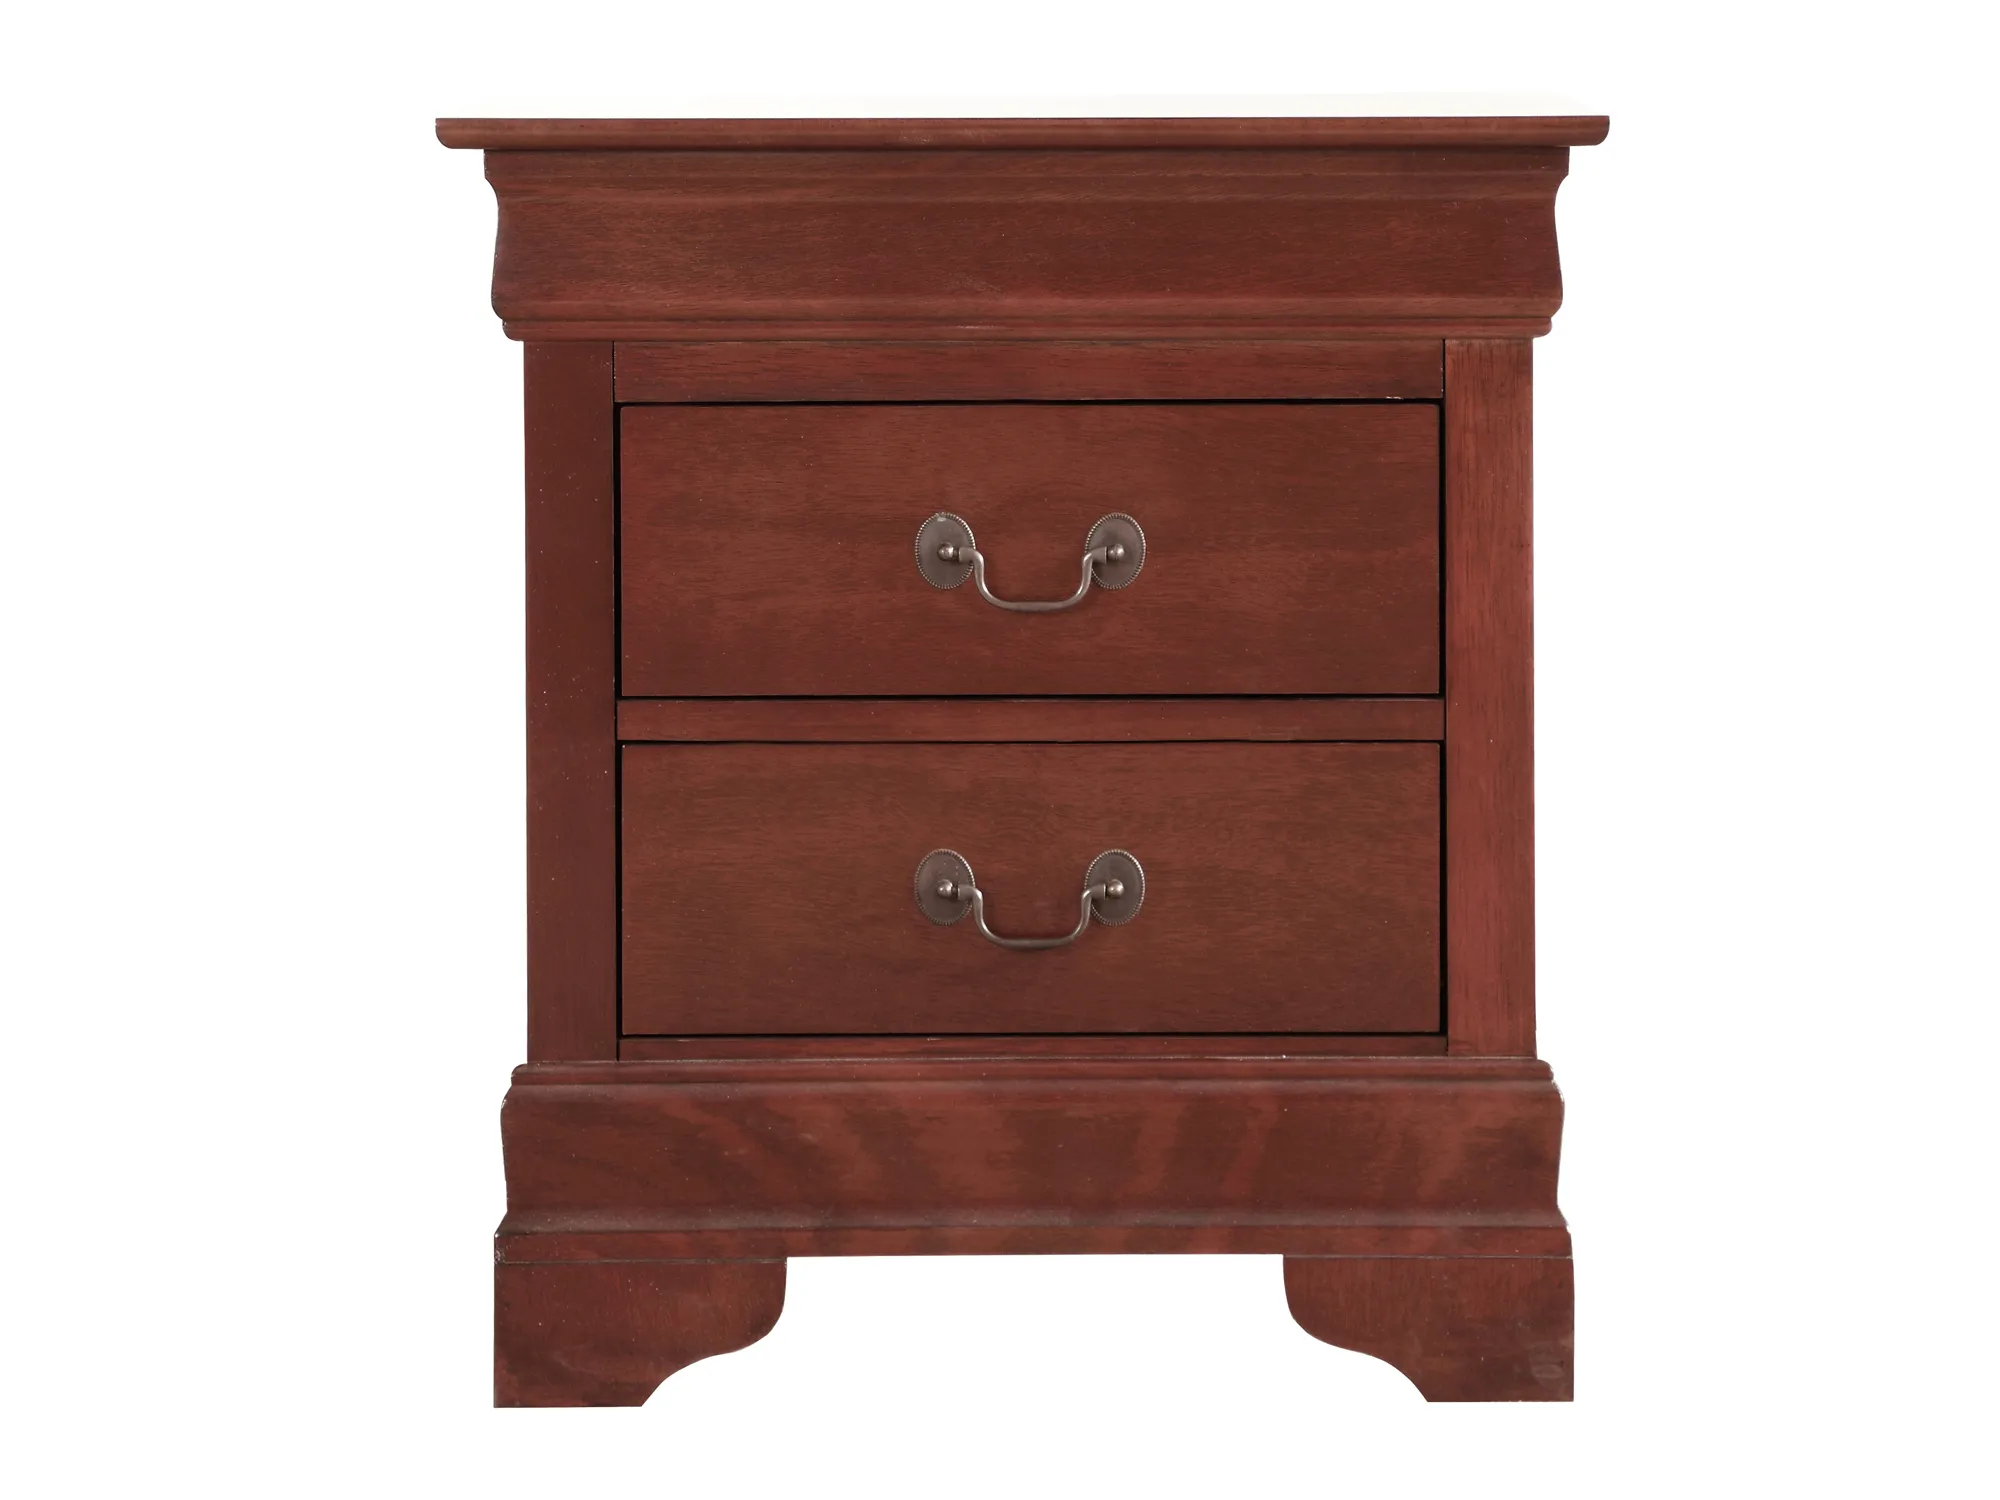 Louis Philippe 2-Drawer Nightstand (24 in. H X 22 in. W X 16 in. D)